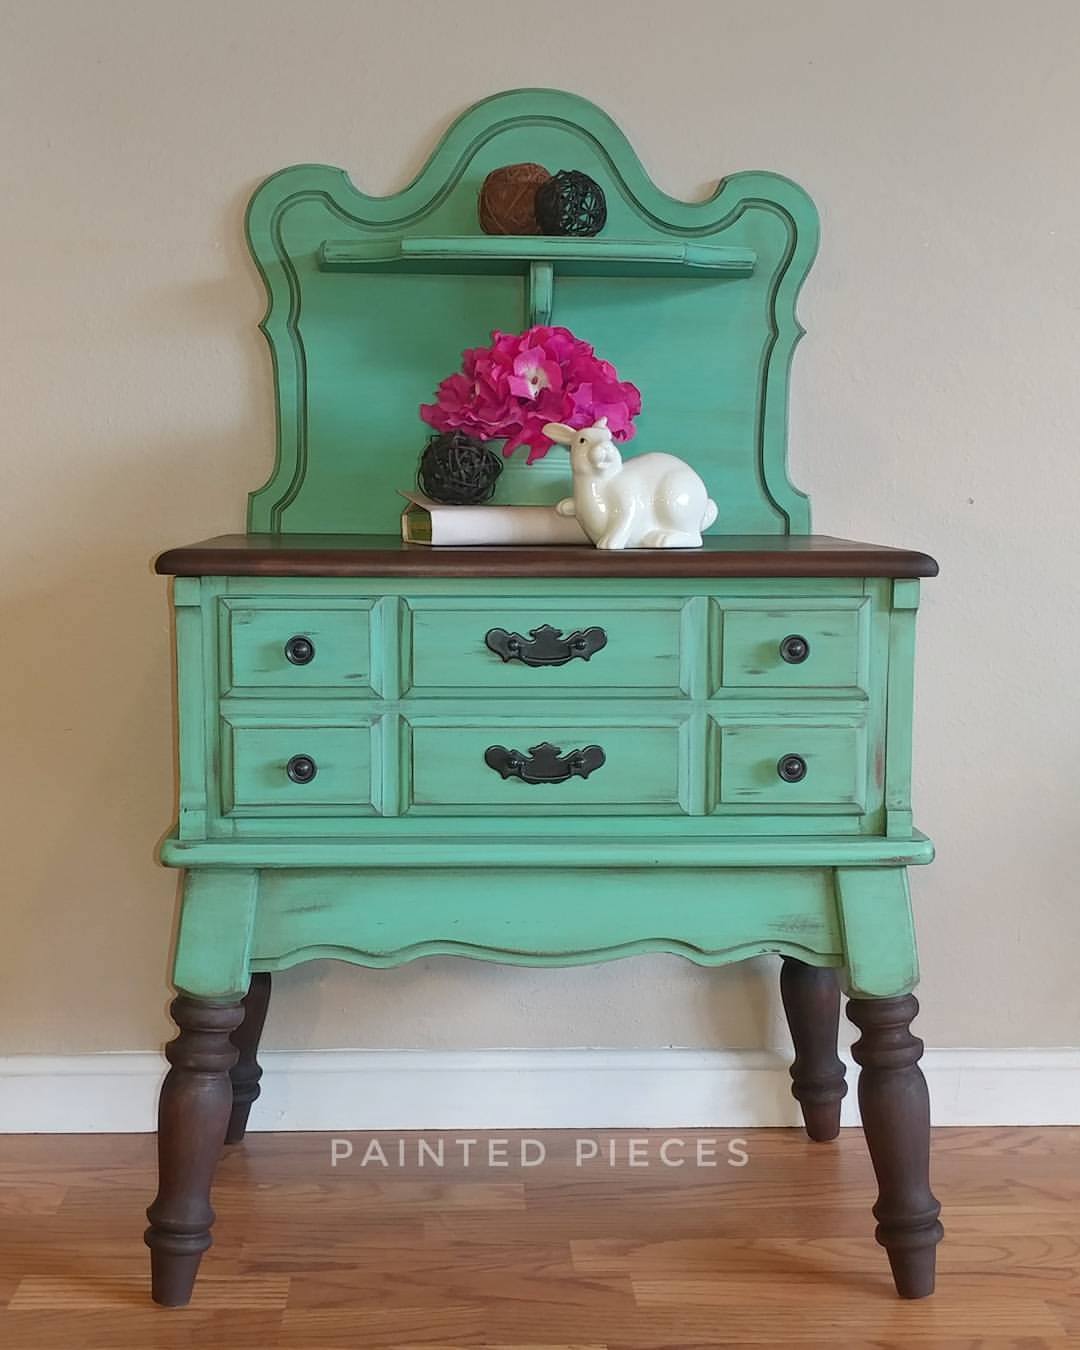 patina green accent table general finishes design center scd turquoise erin painted pieces java gel stain milk paint world market owings console round metal side target best